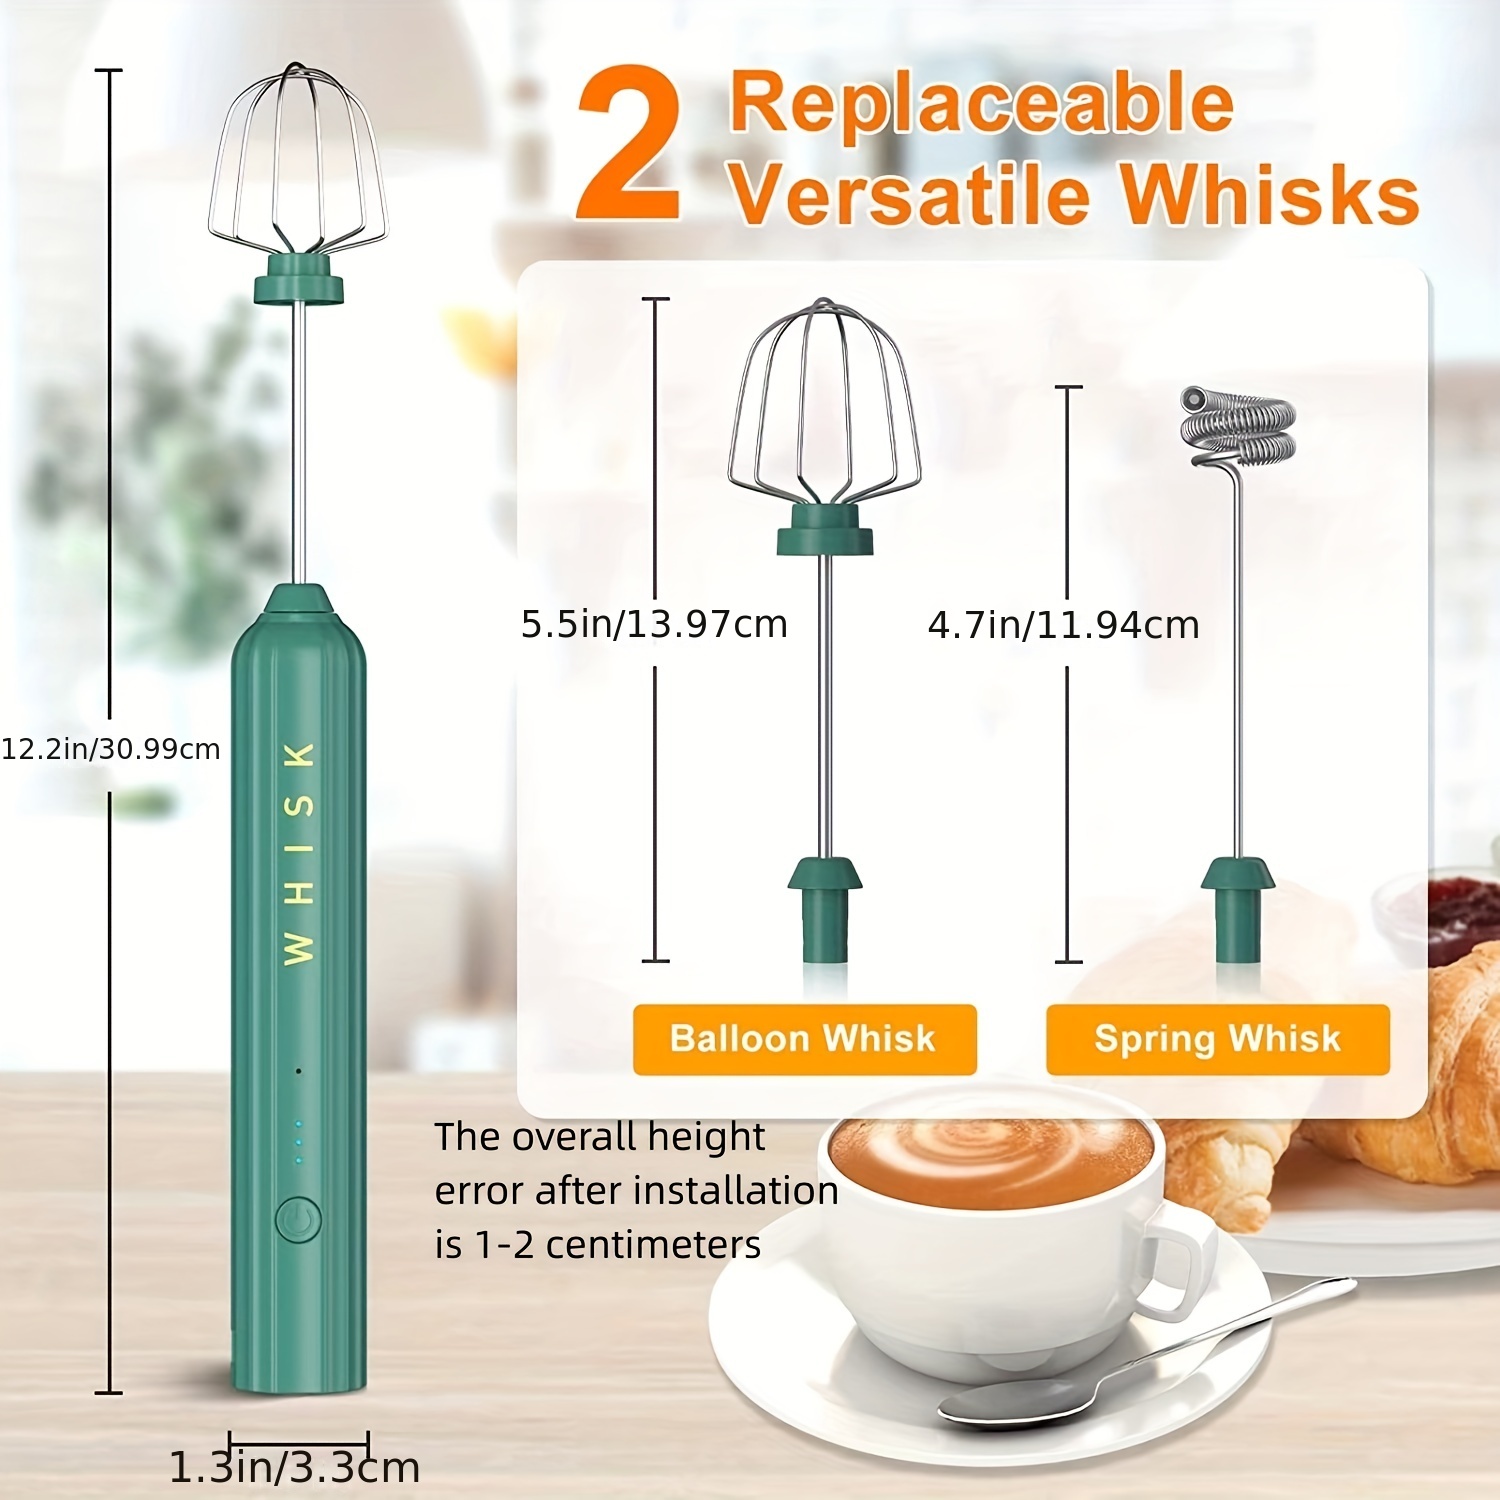 https://img.kwcdn.com/product/stainless-steel-handheld-milk-frother/d69d2f15w98k18-4b486abd/fancyalgo/toaster-api/toaster-processor-image-cm2in/36d9389c-18ea-11ee-ad7f-0a580a698dd1.jpg?imageMogr2/auto-orient%7CimageView2/2/w/800/q/70/format/webp